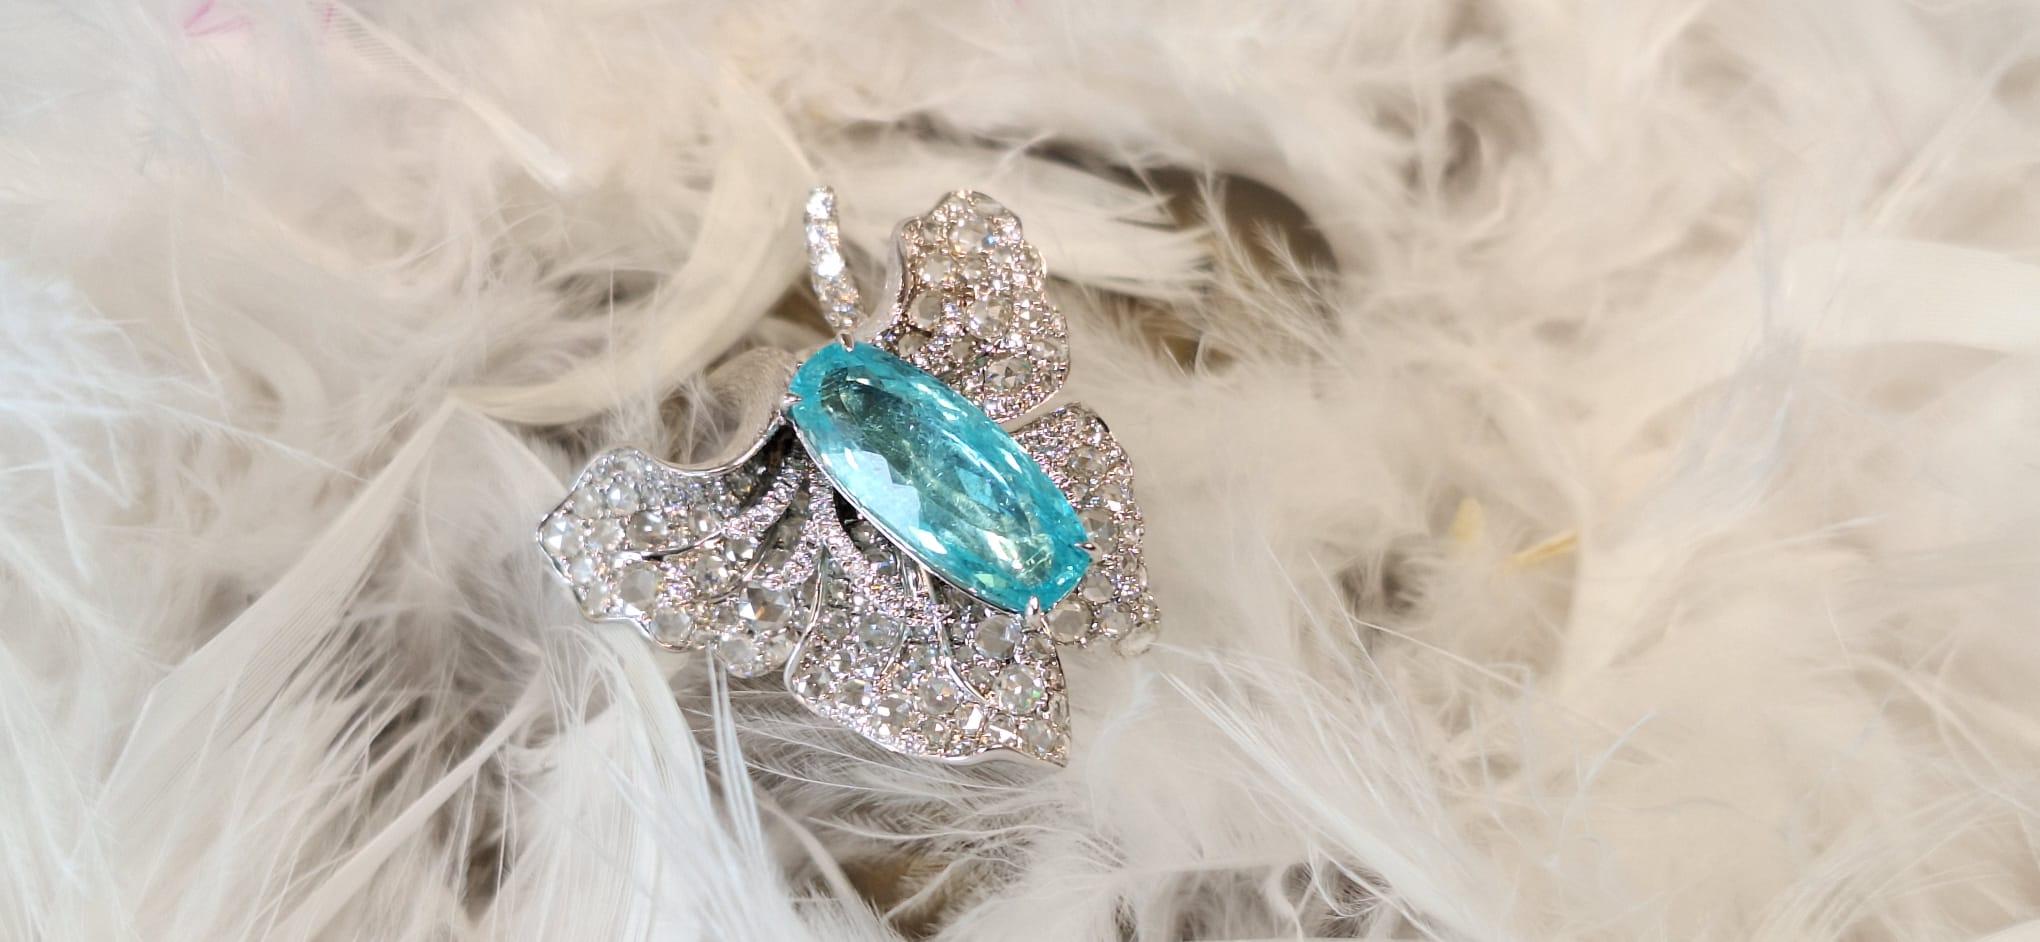 18K White Gold Diamond Ring with Paraiba For Sale 8